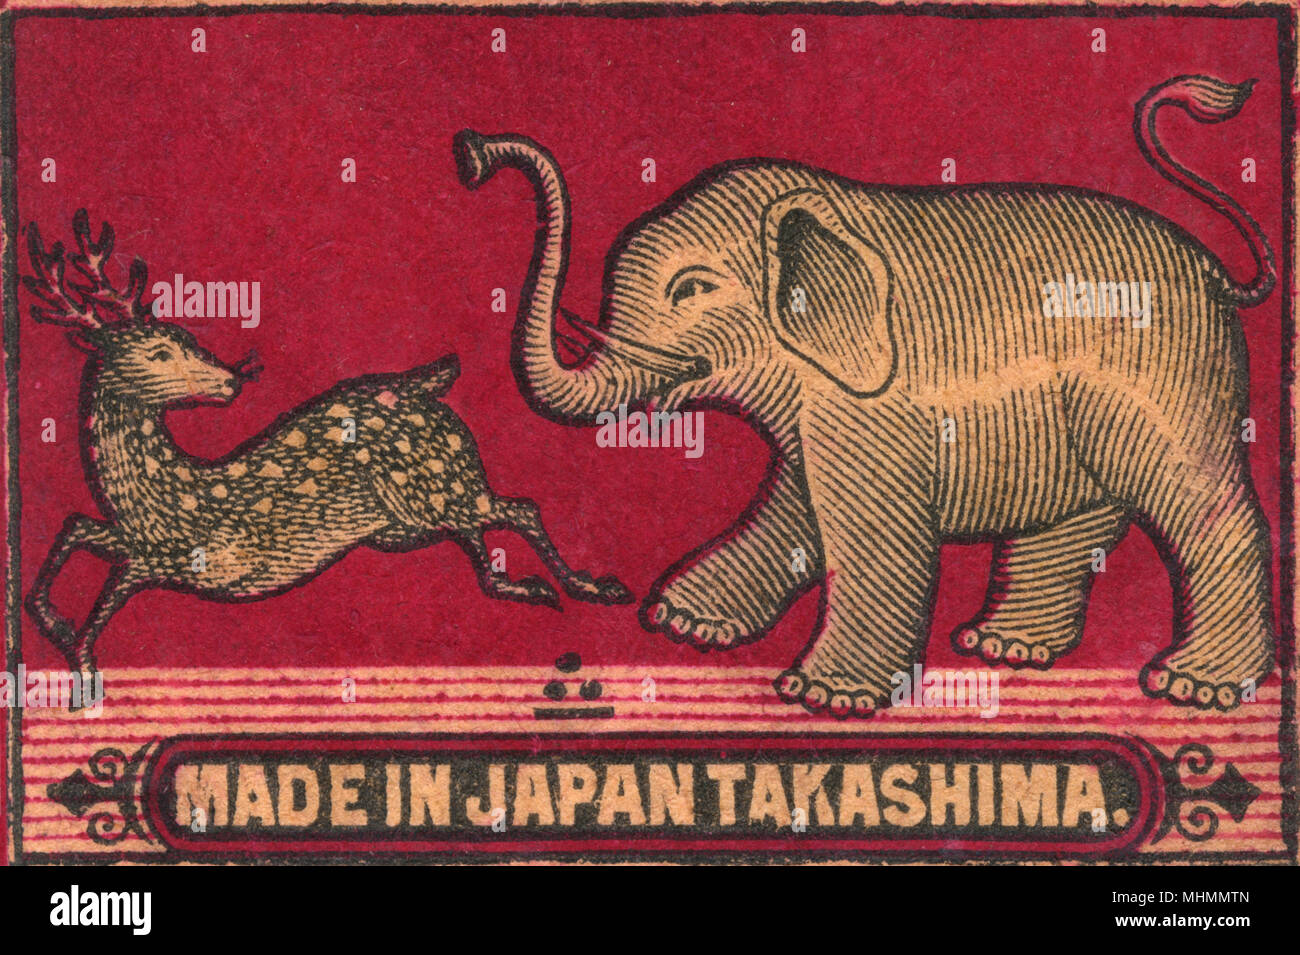 Old Japanese Matchbox label with an elephant chasing a deer made by Takashima in Japan      Date: c. 1910s Stock Photo